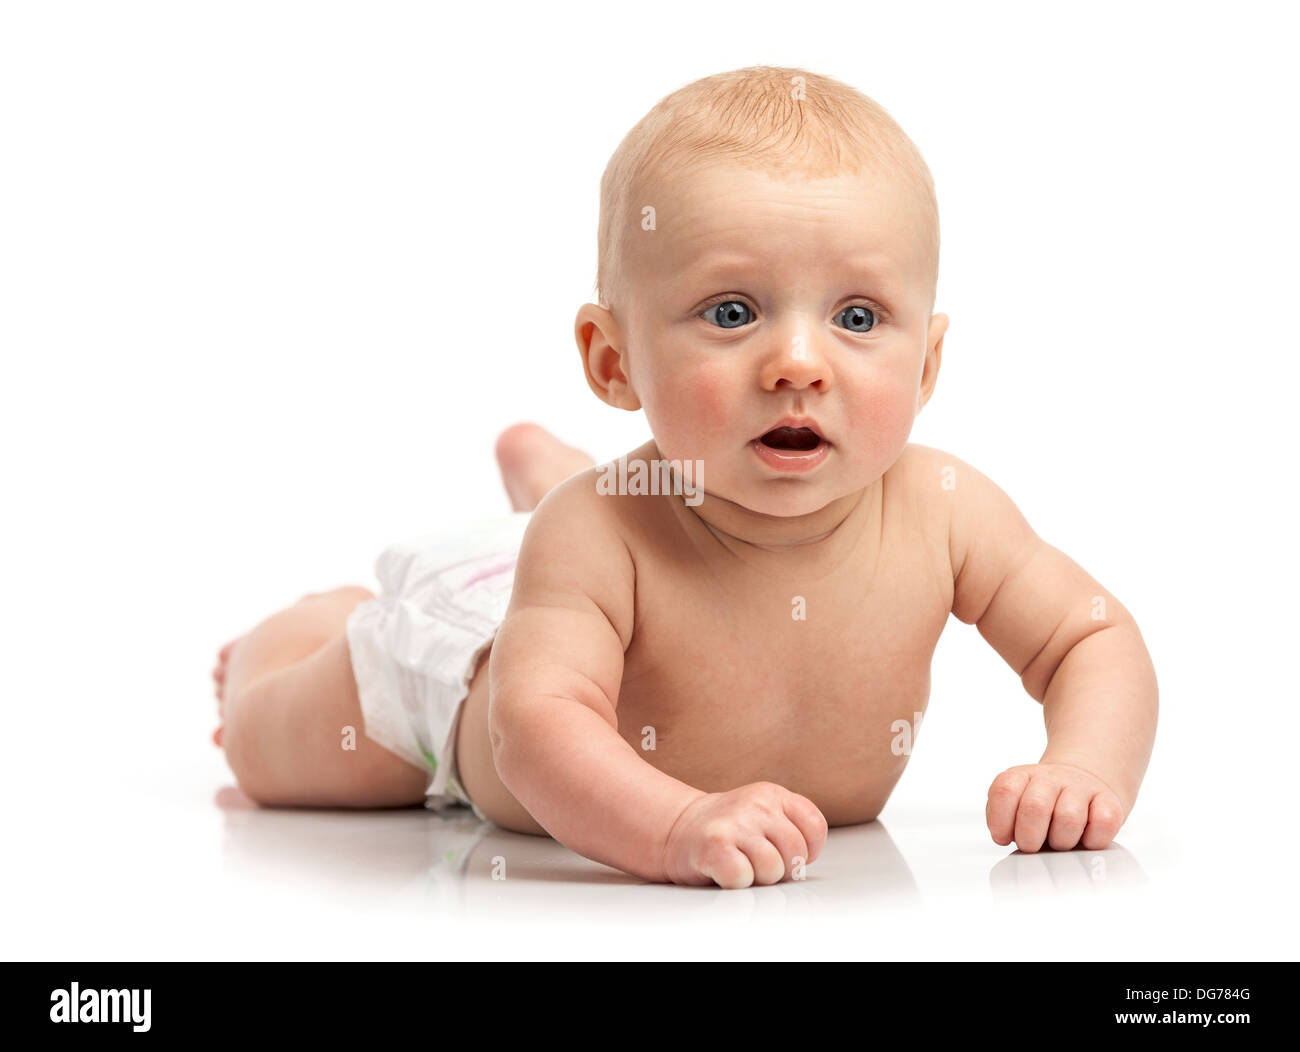 Cute baby boy lying on stomach over white background Banque D'Images